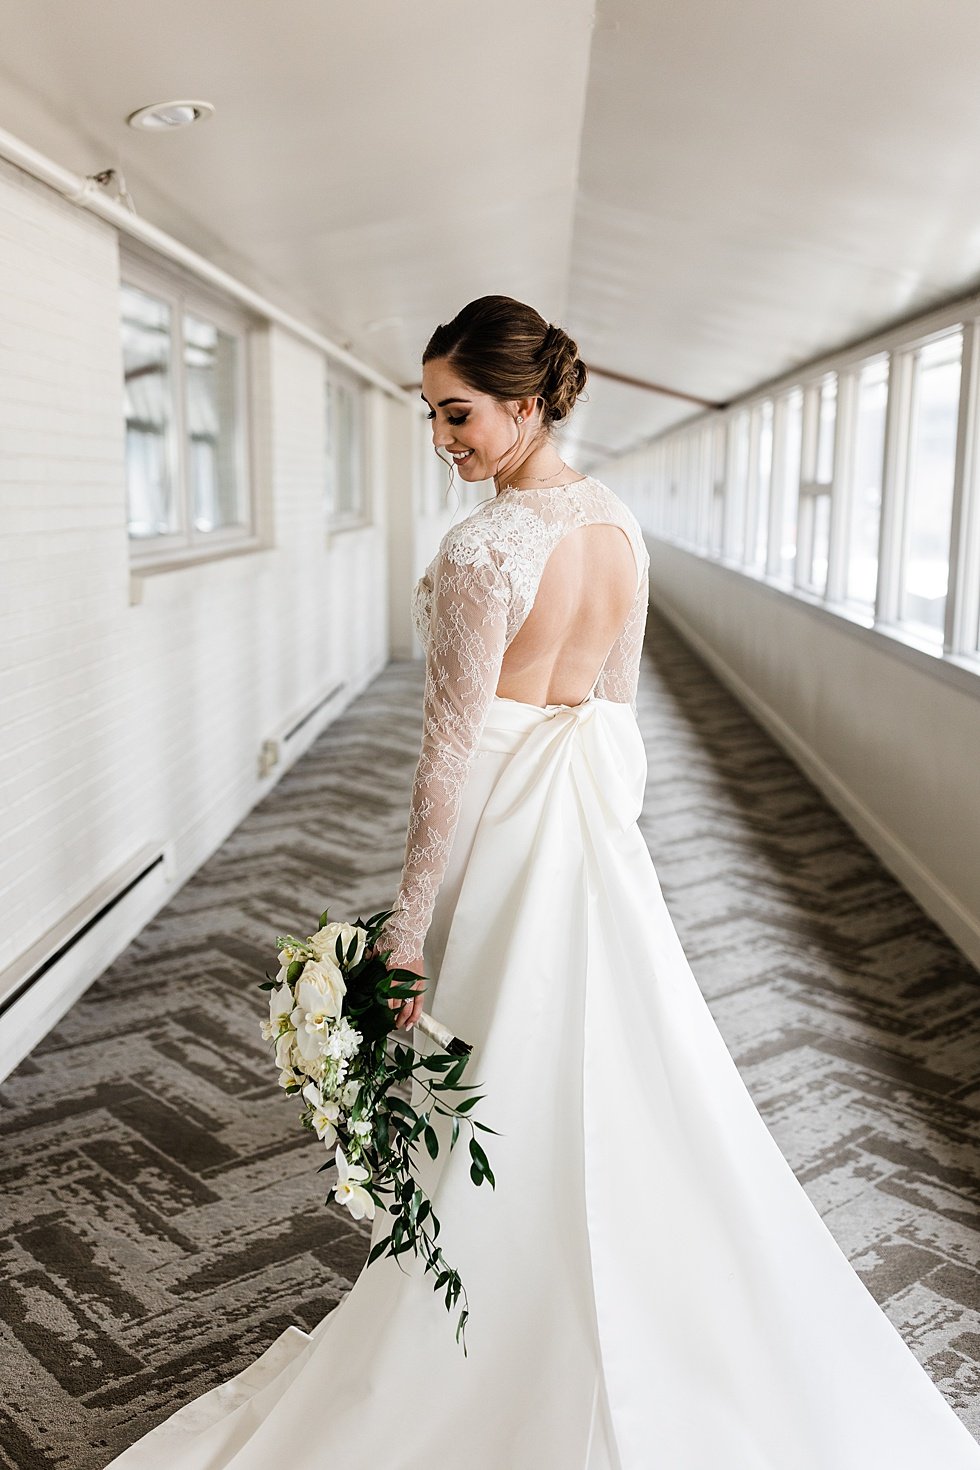  Bridals at Galt House Hotel. Lauren and Adam's winter wedding at St Agnes Catholic church and the Frazier History Museum. 